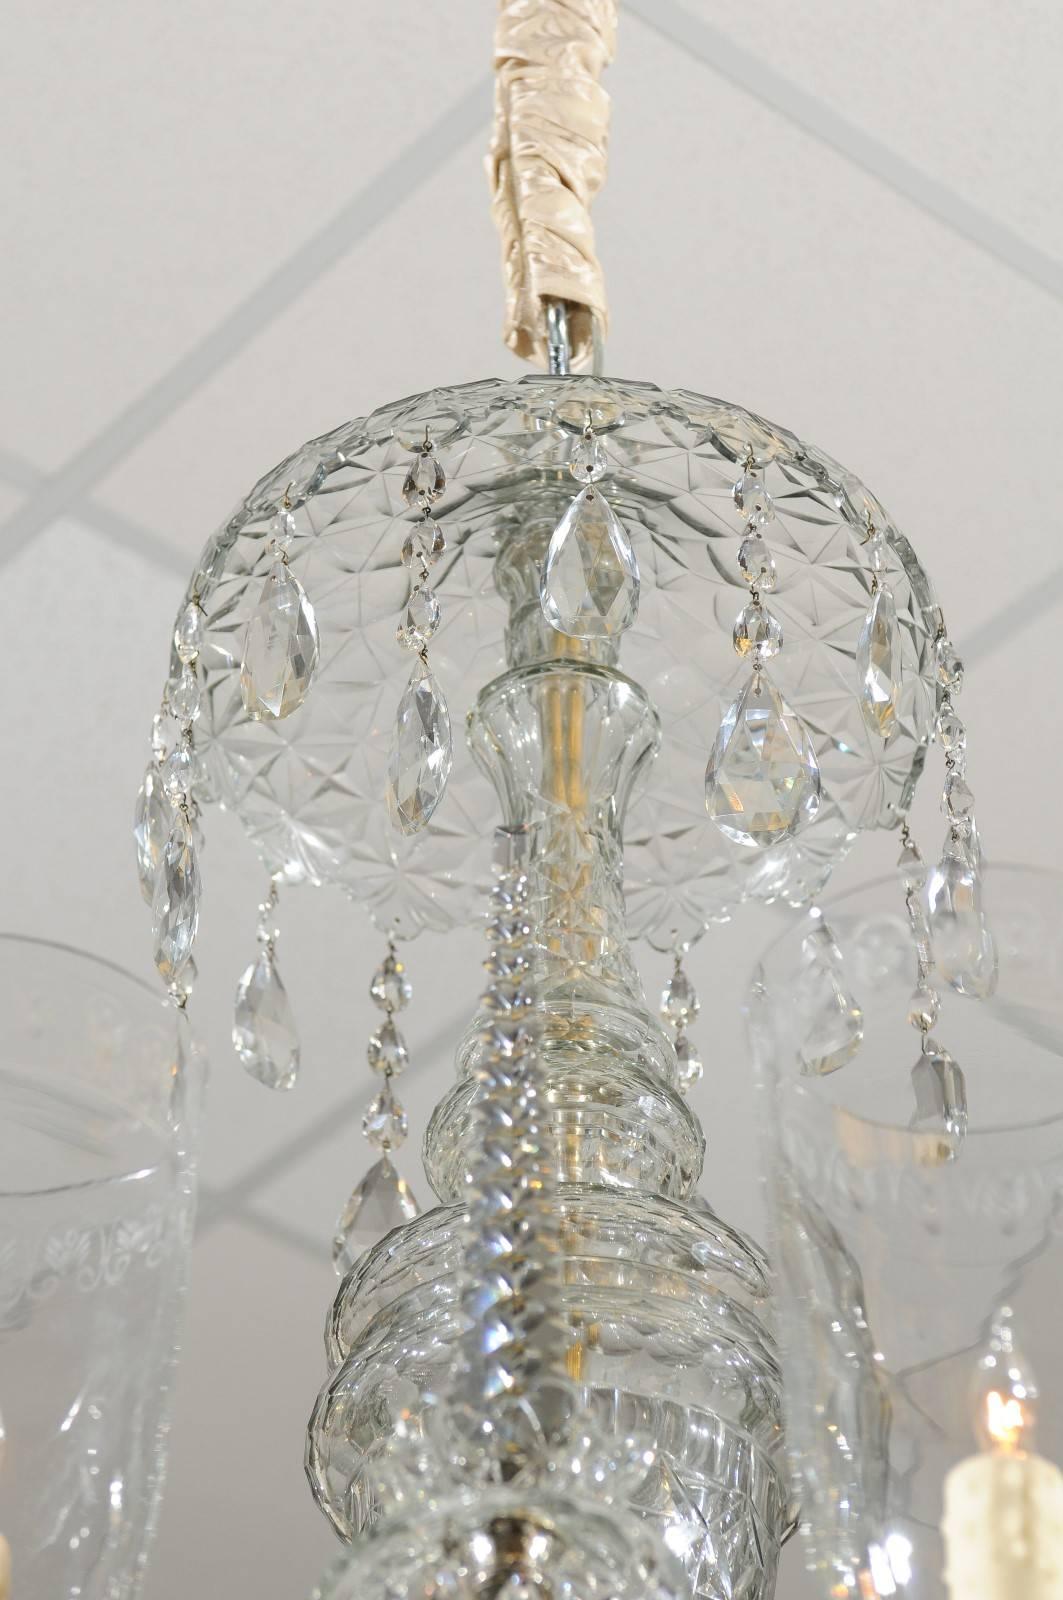 Mid-19th Century Irish Waterford Crystal Eight-Arm Chandelier For Sale 1